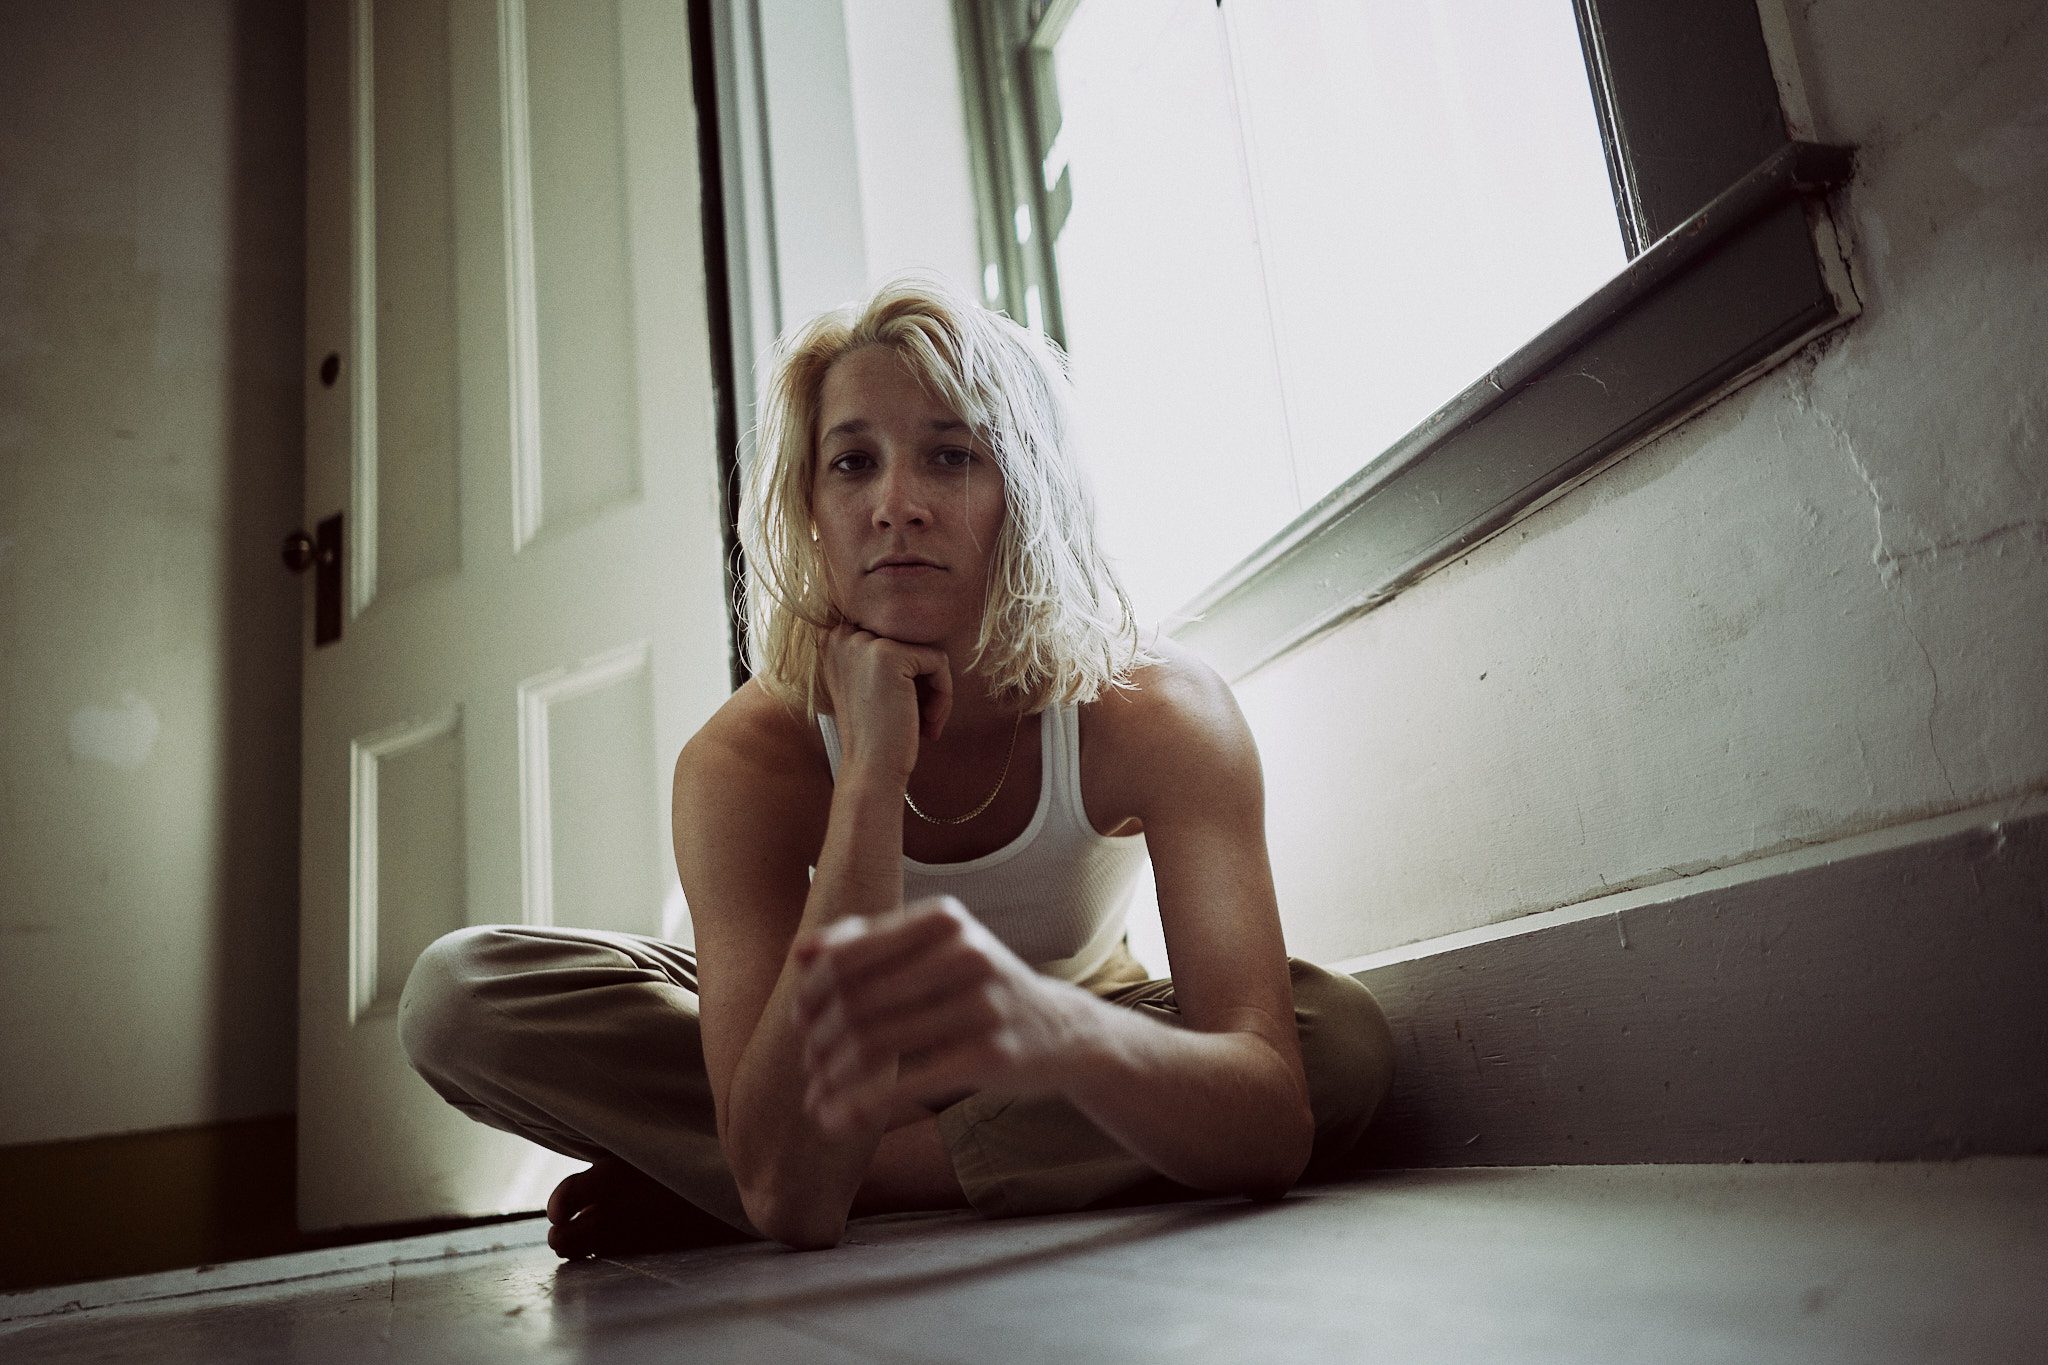 A portrait of Louisa Stancioff leaning forward while seated on an interior floor